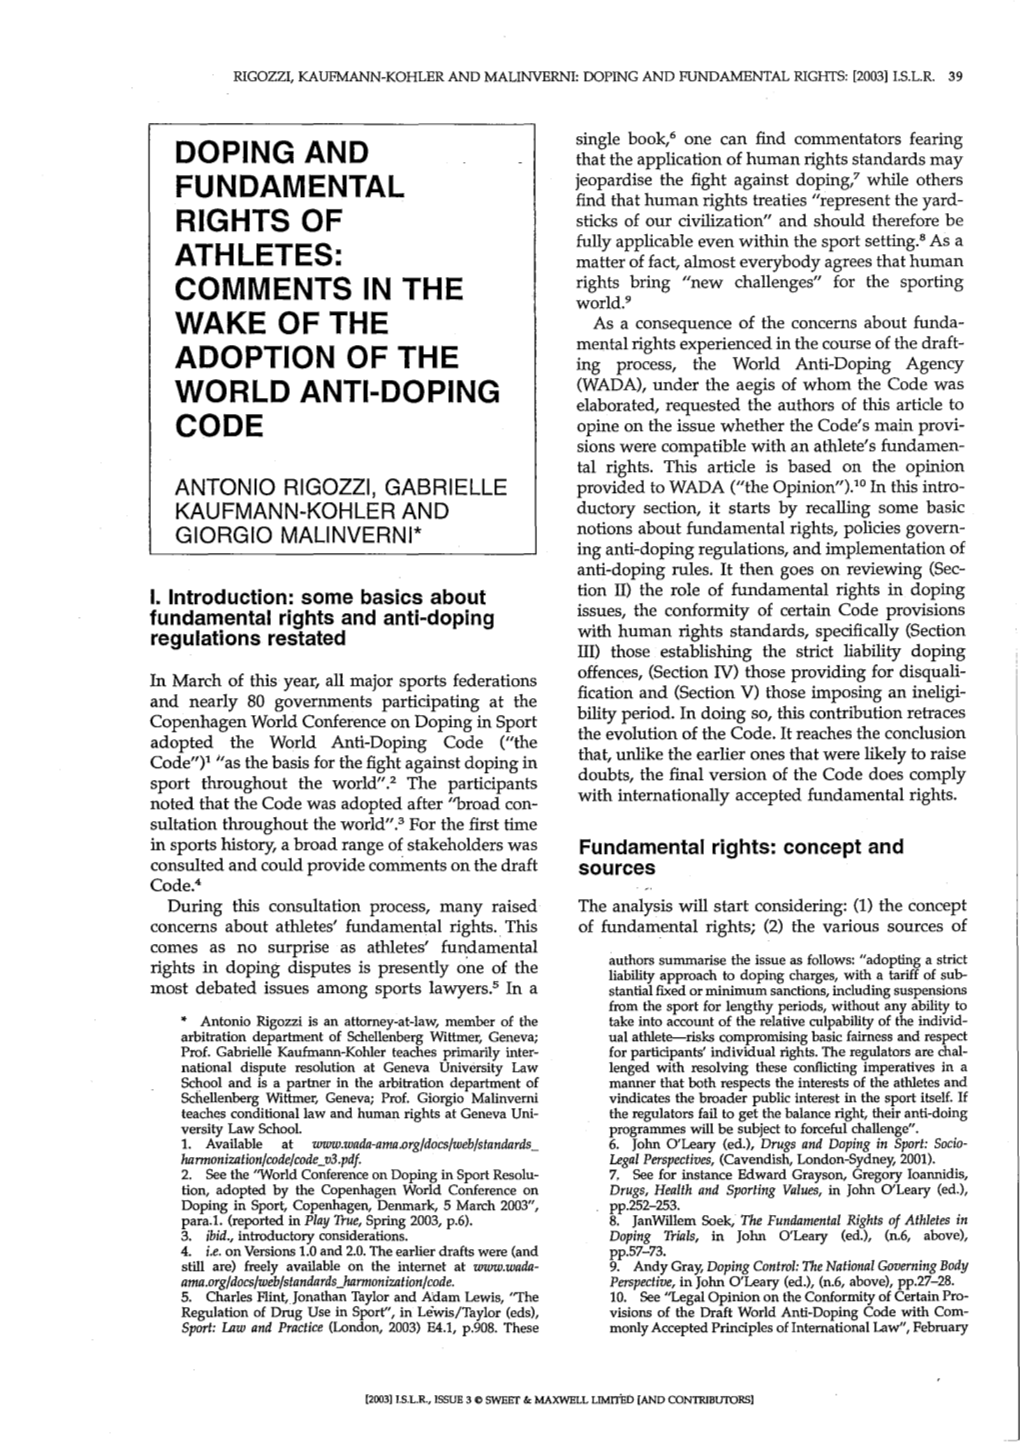 DOPING and FUNDAMENTAL RIGHTS: [2003] L.S.L.R